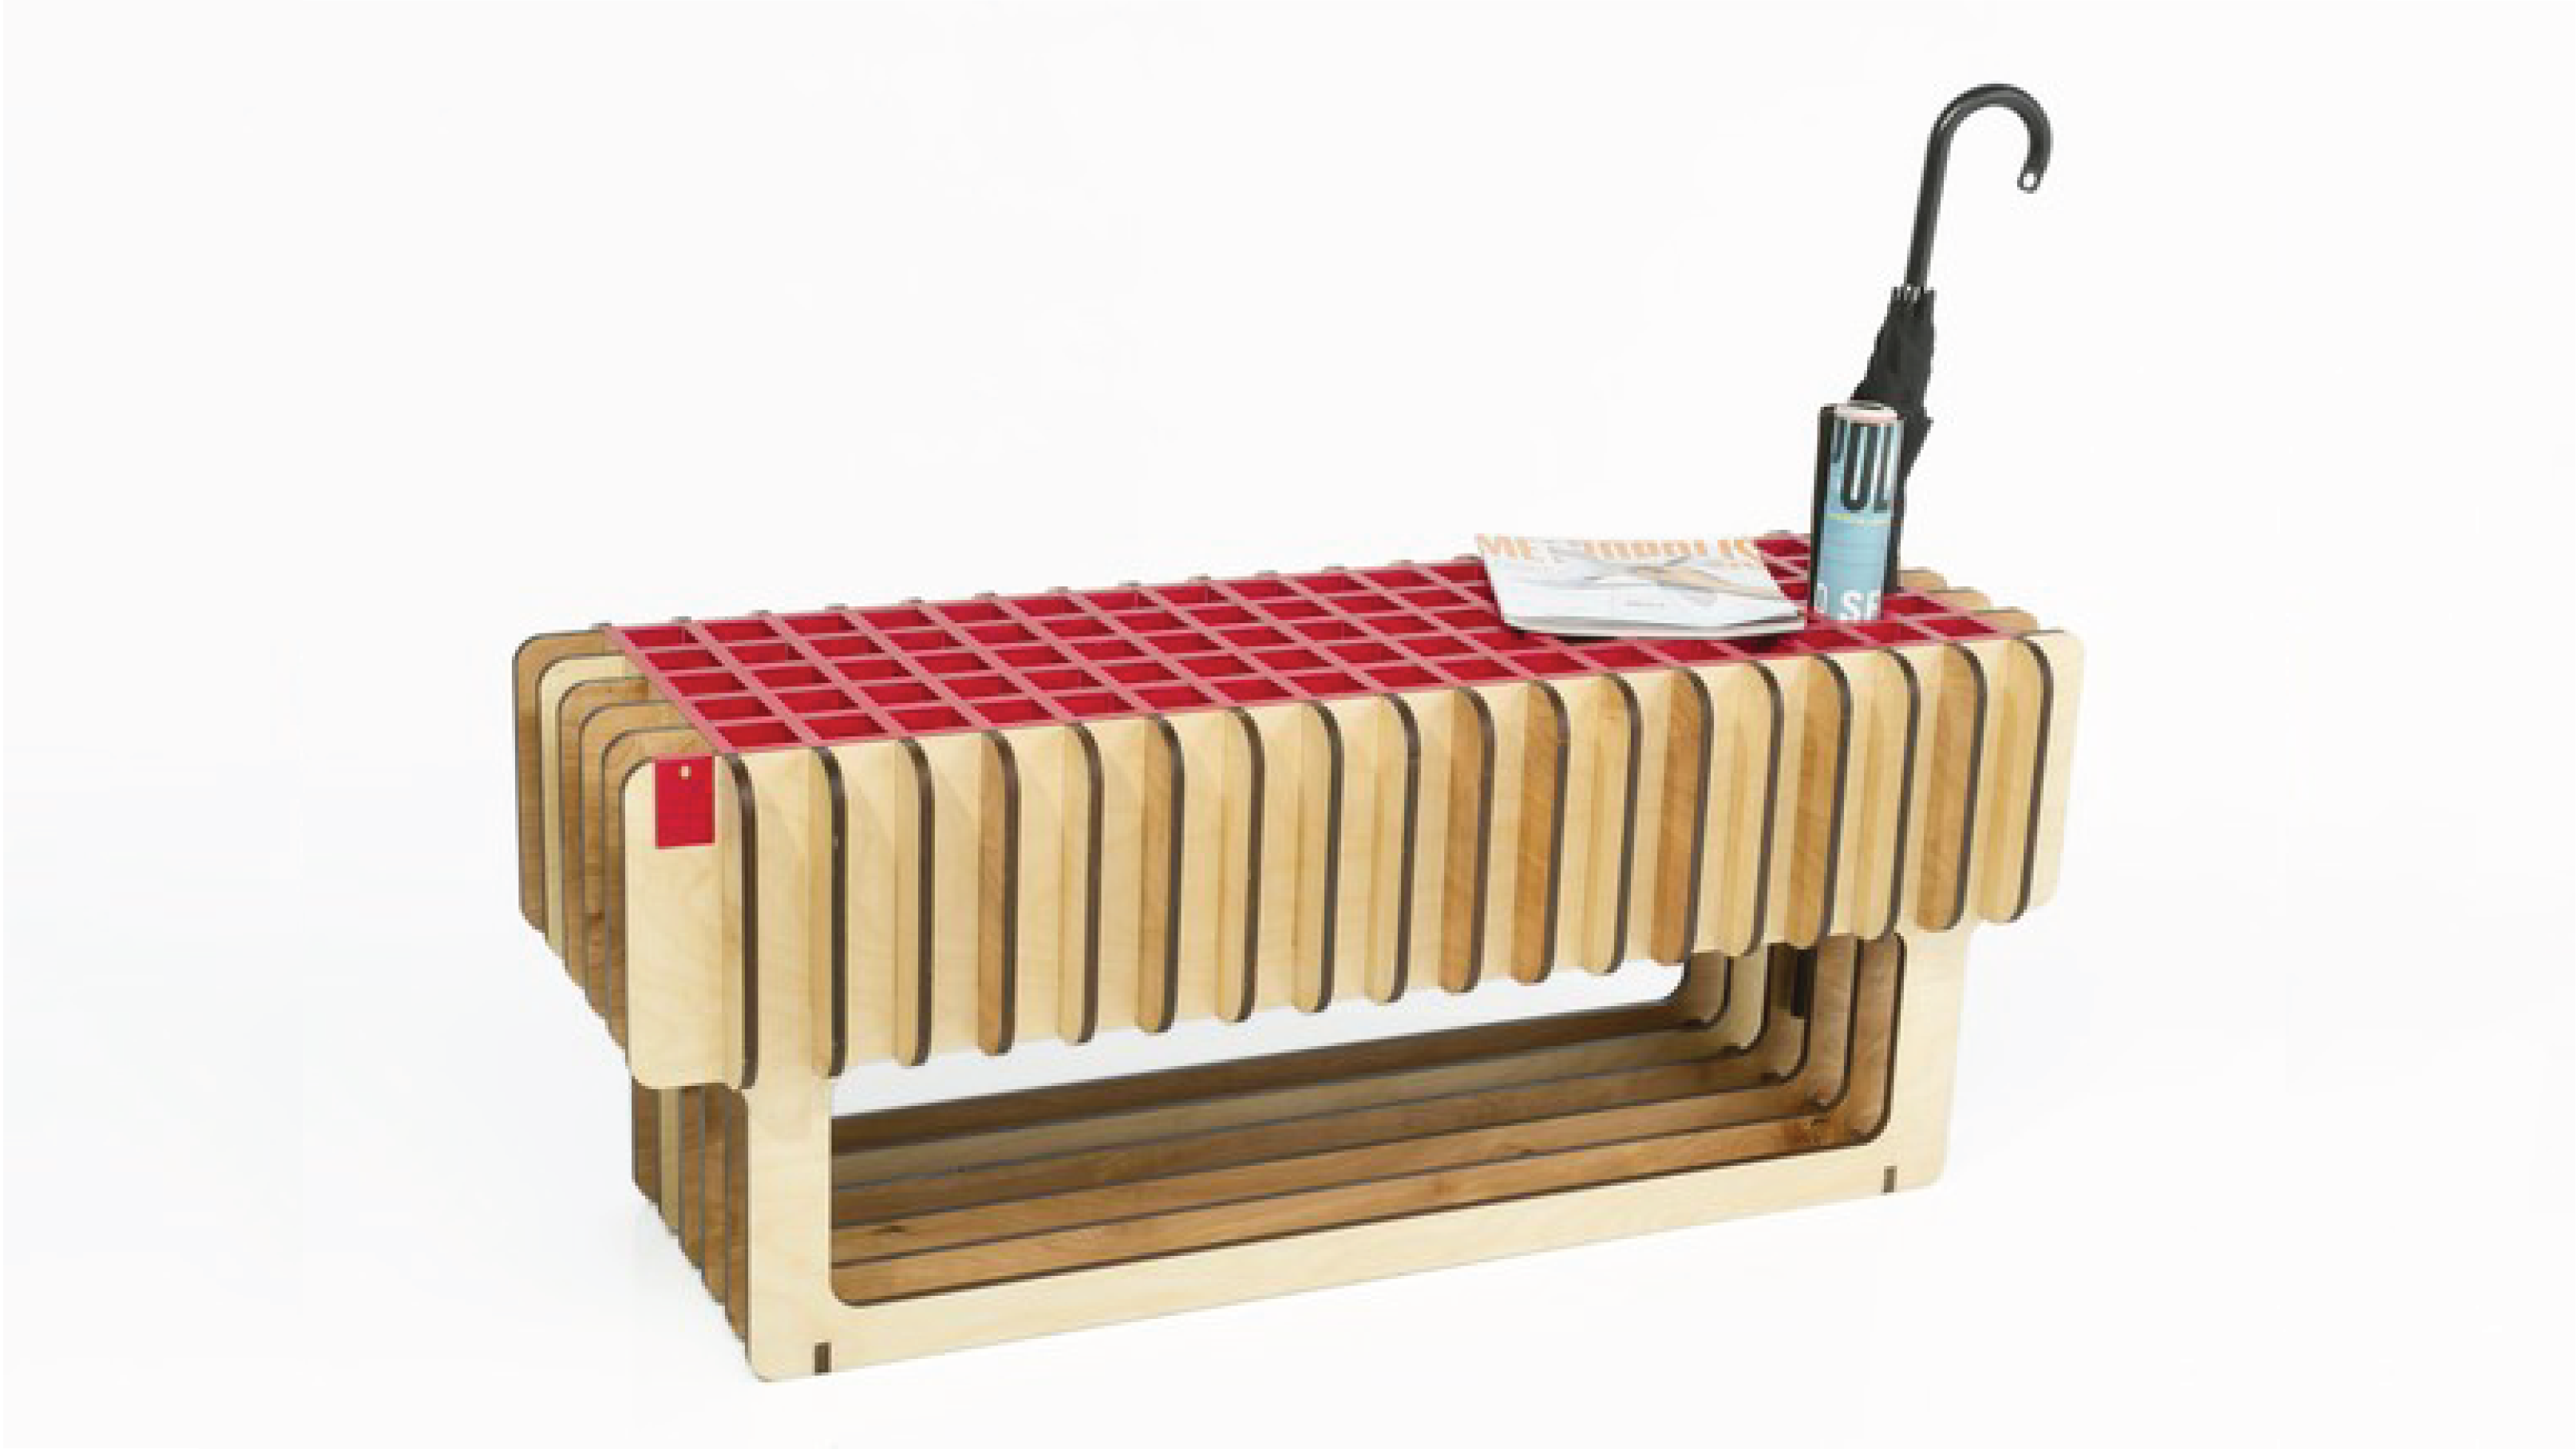 Bench with slots for holding objects.